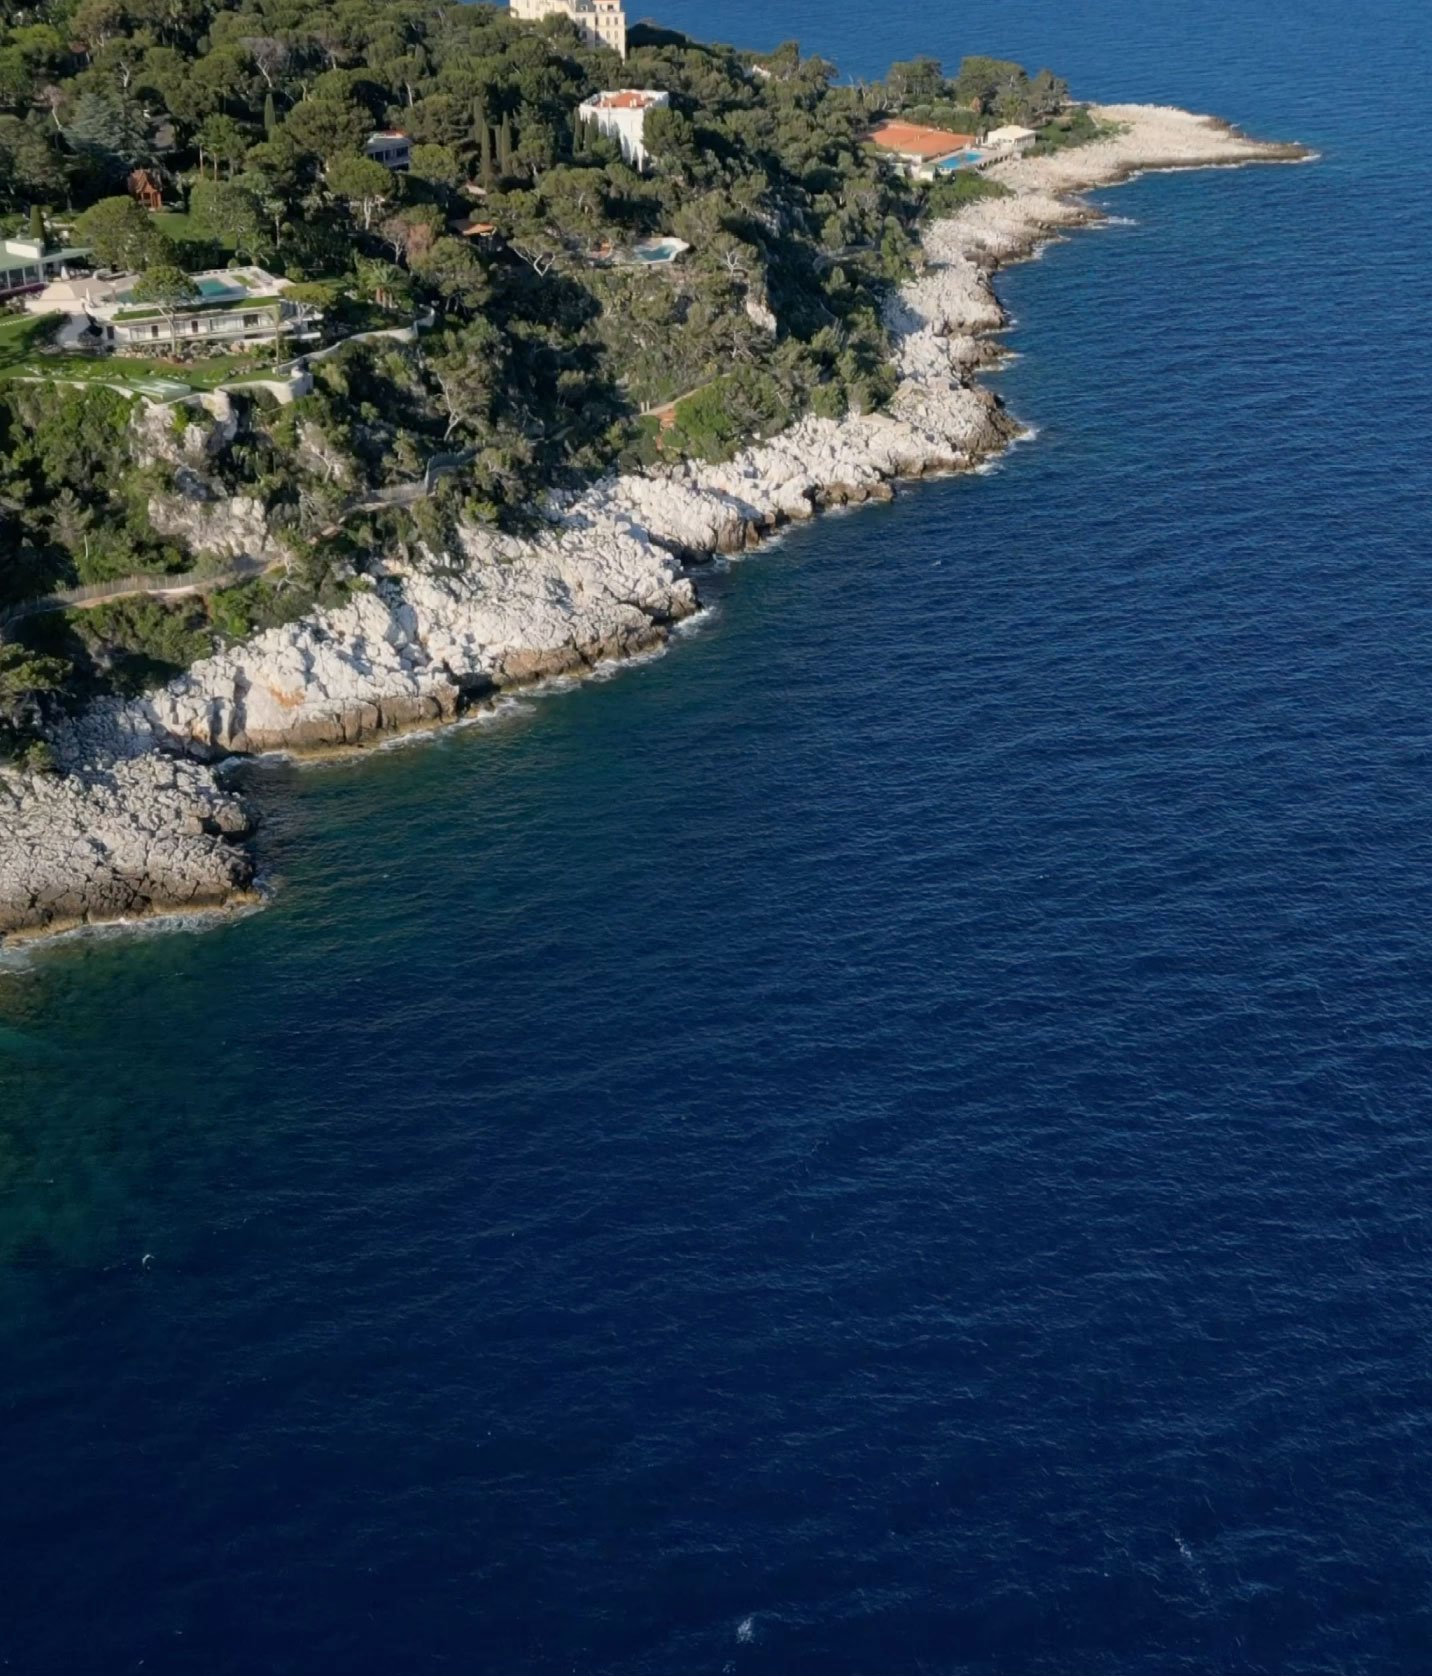 The coastline in the south of France